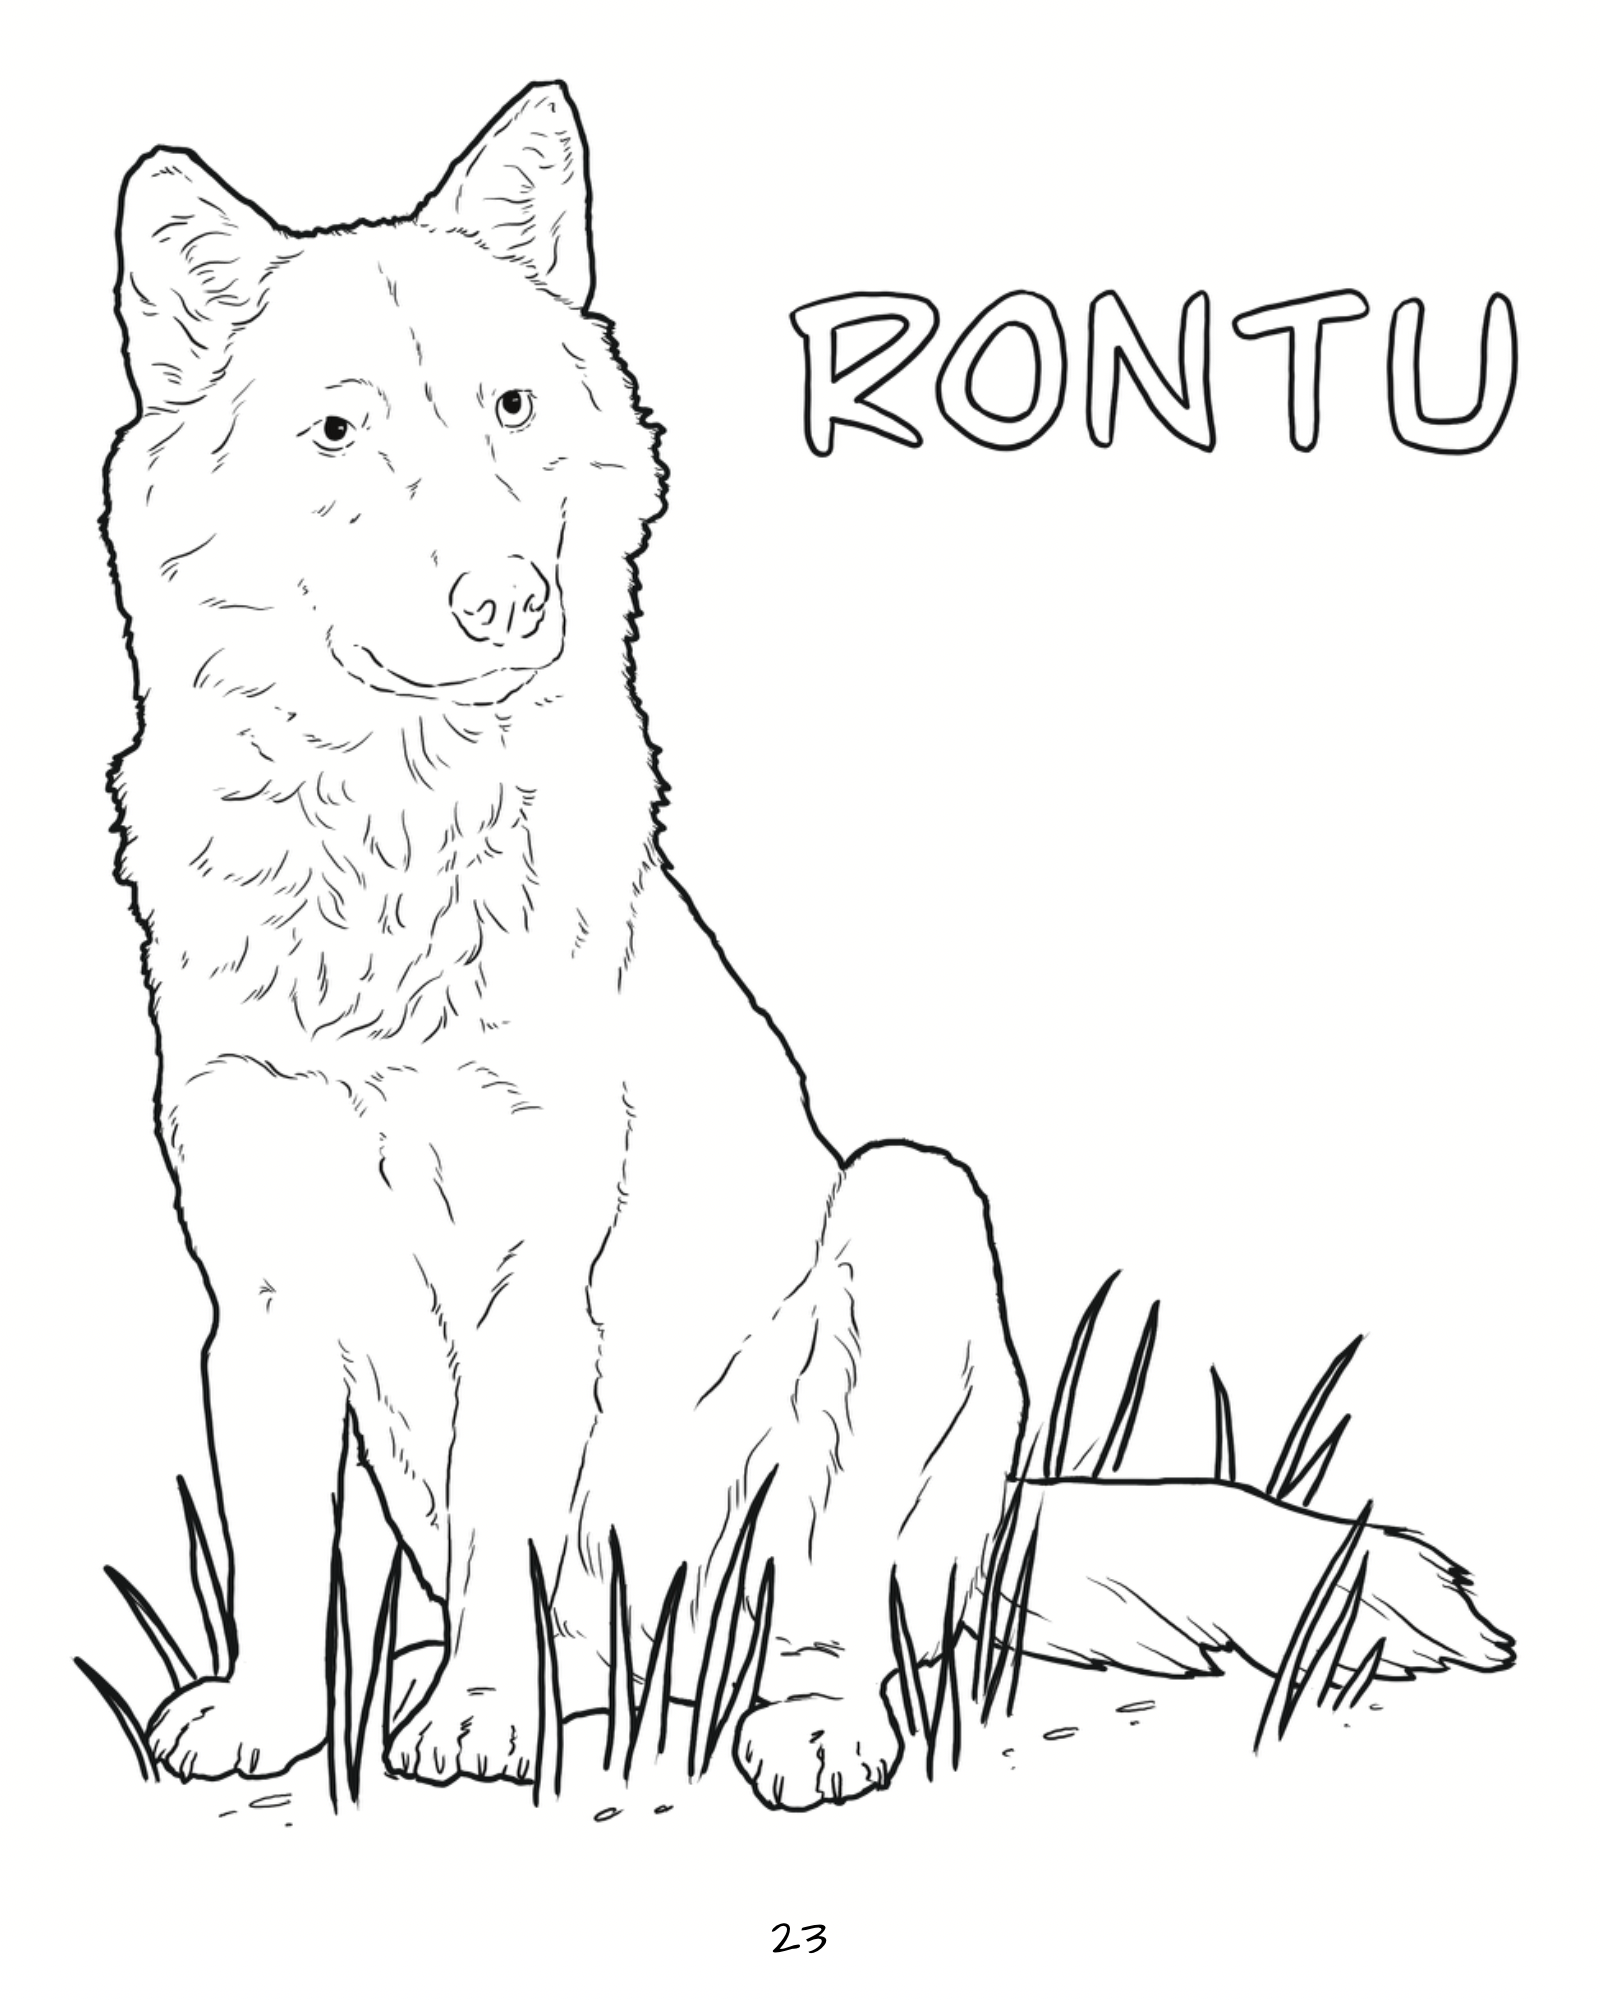 rontu from island of the blue dolphins